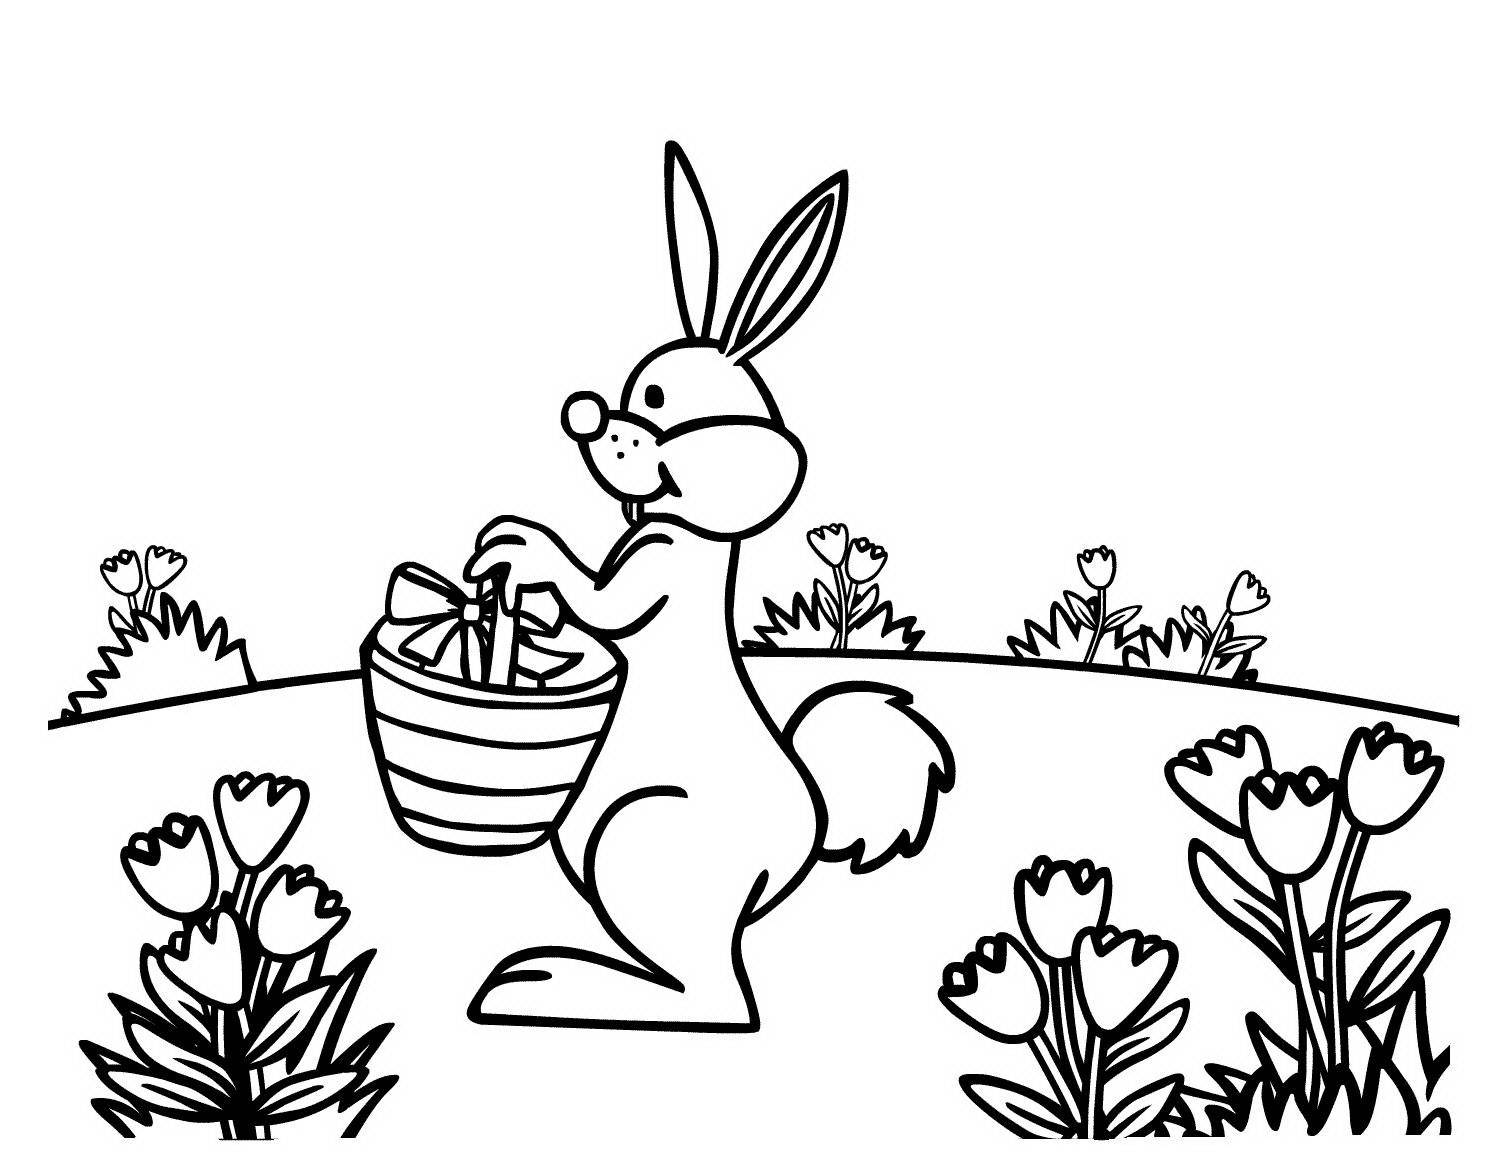 Coloring The Easter Bunny. Category Pets allowed. Tags:  the rabbit.